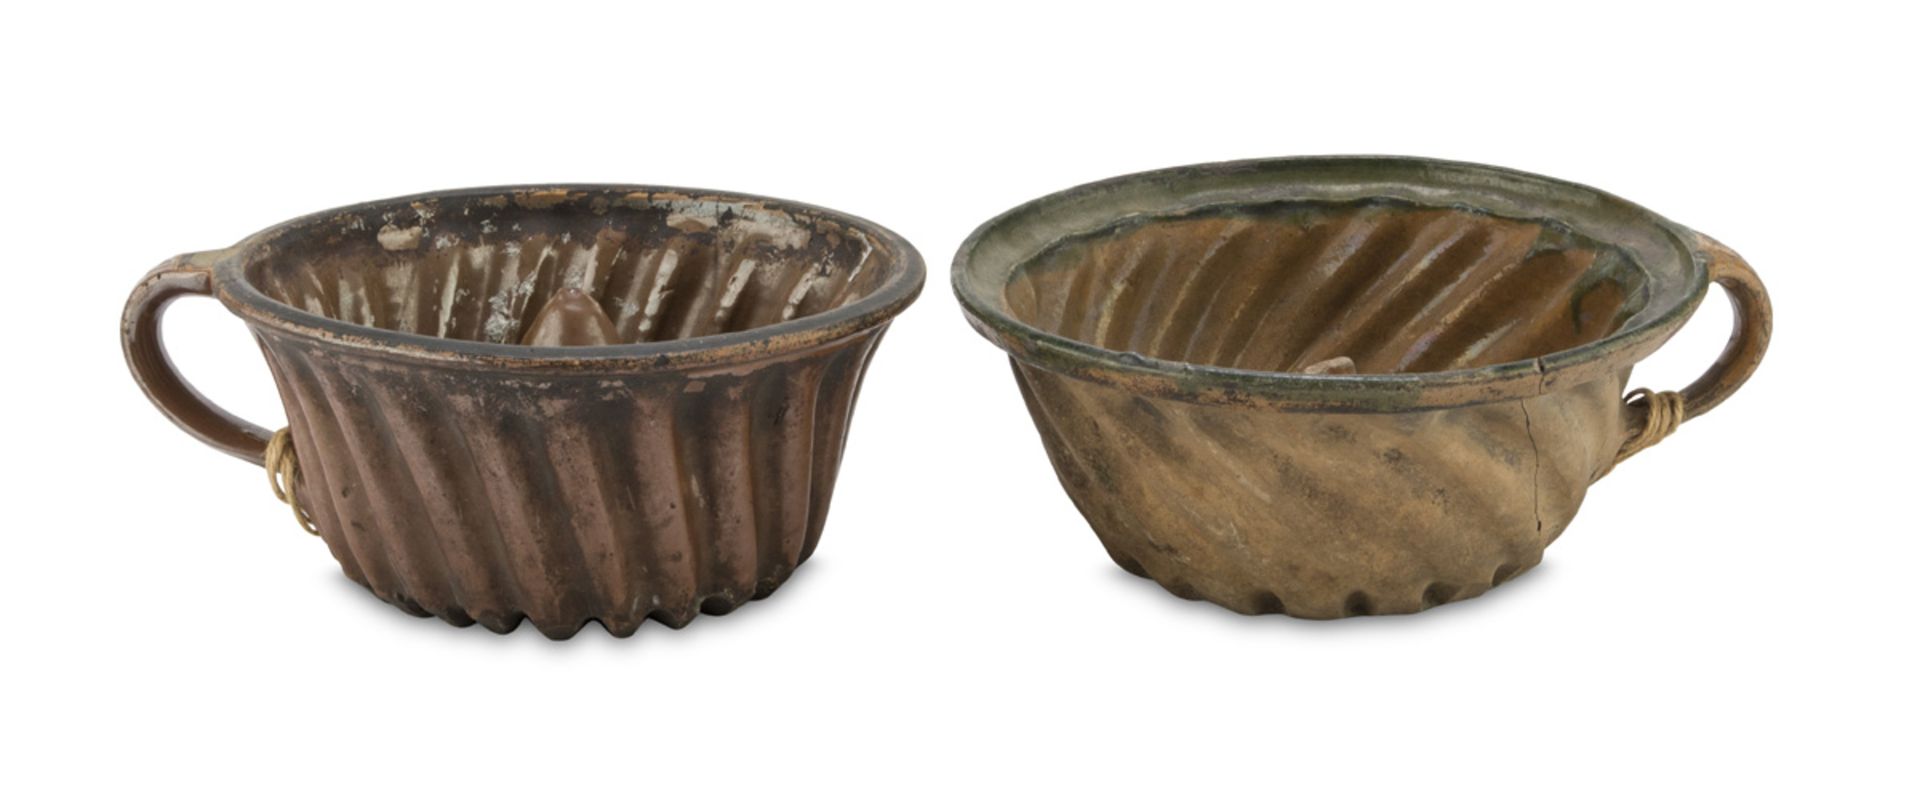 TWO EARTHENWARE MOLDS SOUTHERN ITALY 19TH CENTURY